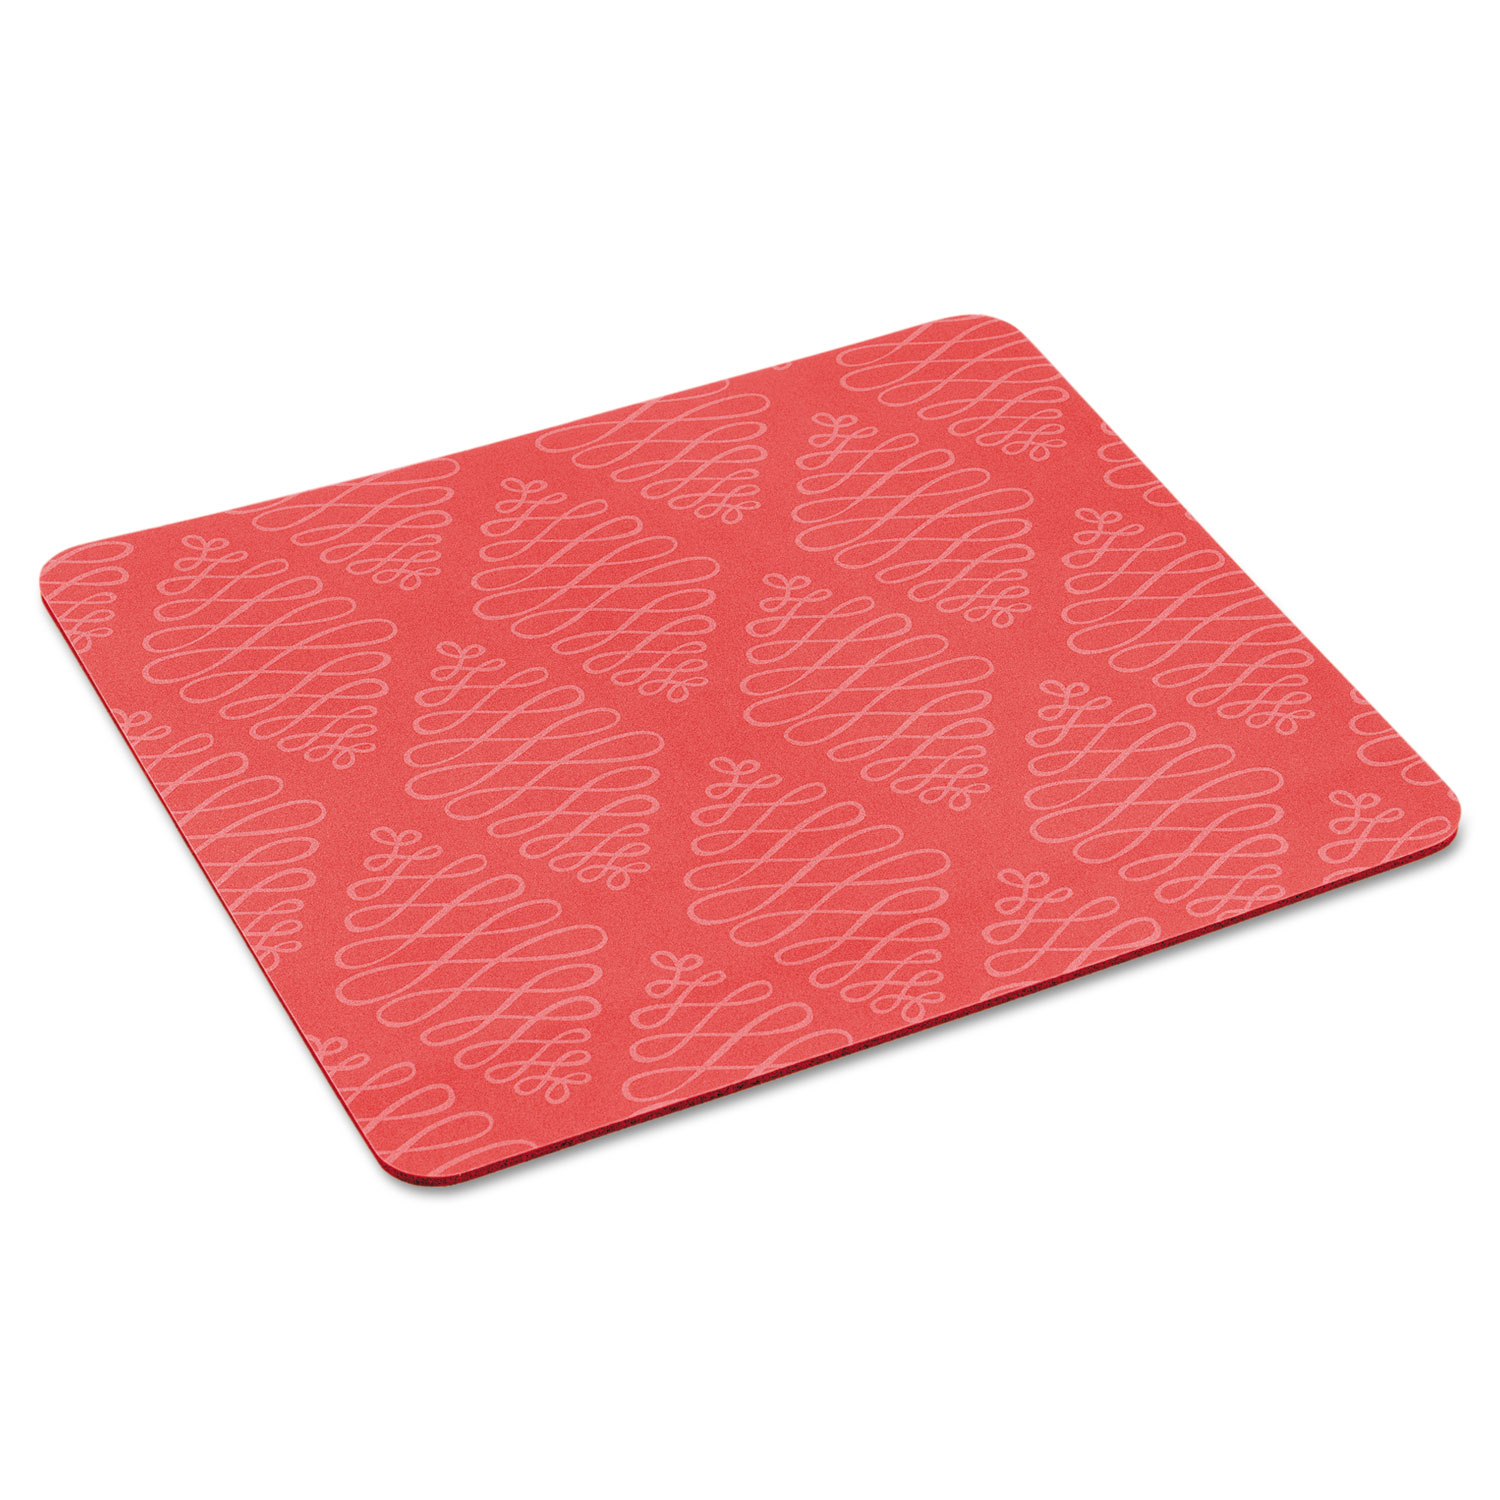 Mouse Pad with Precise Mousing Surface, 9 x 8 x 1/5, Coral Design